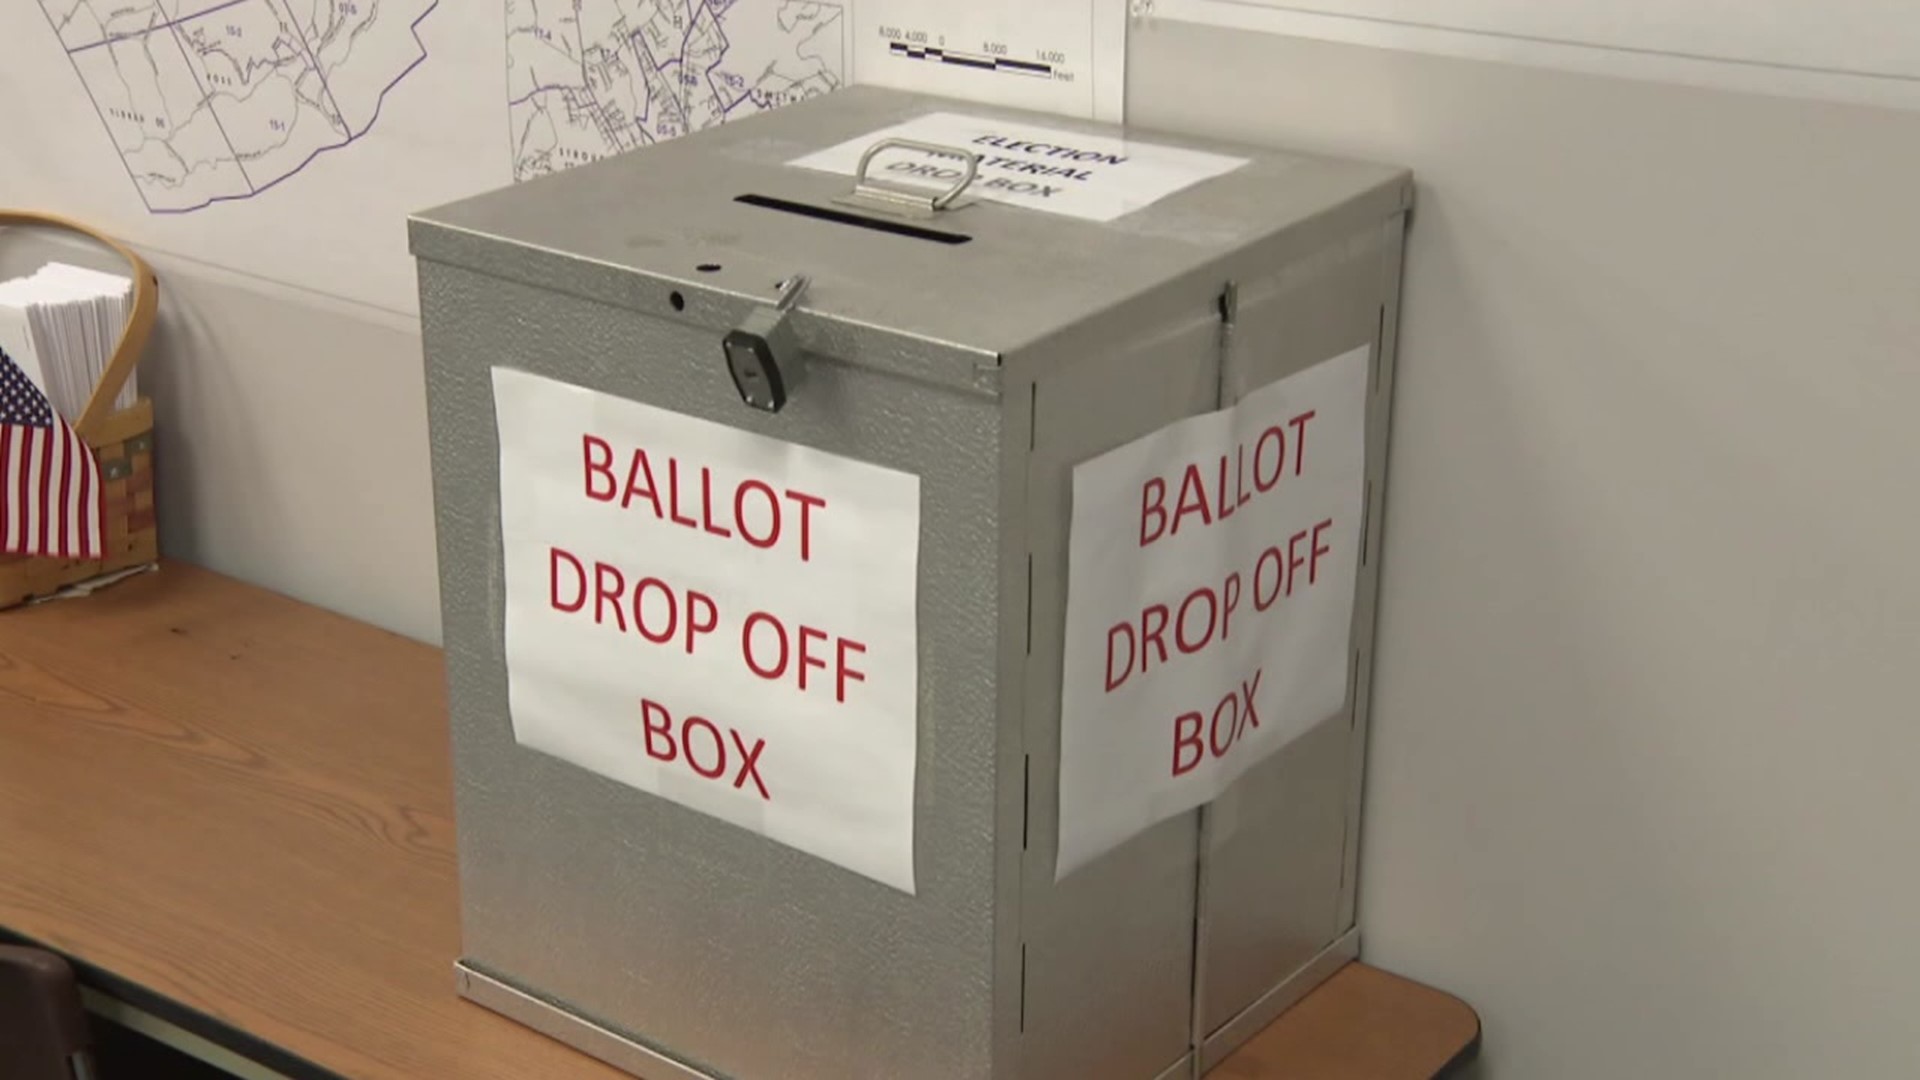 Election officials in Luzerne County will have help in getting ballots sorted and accounted for, allowing them to get results faster.